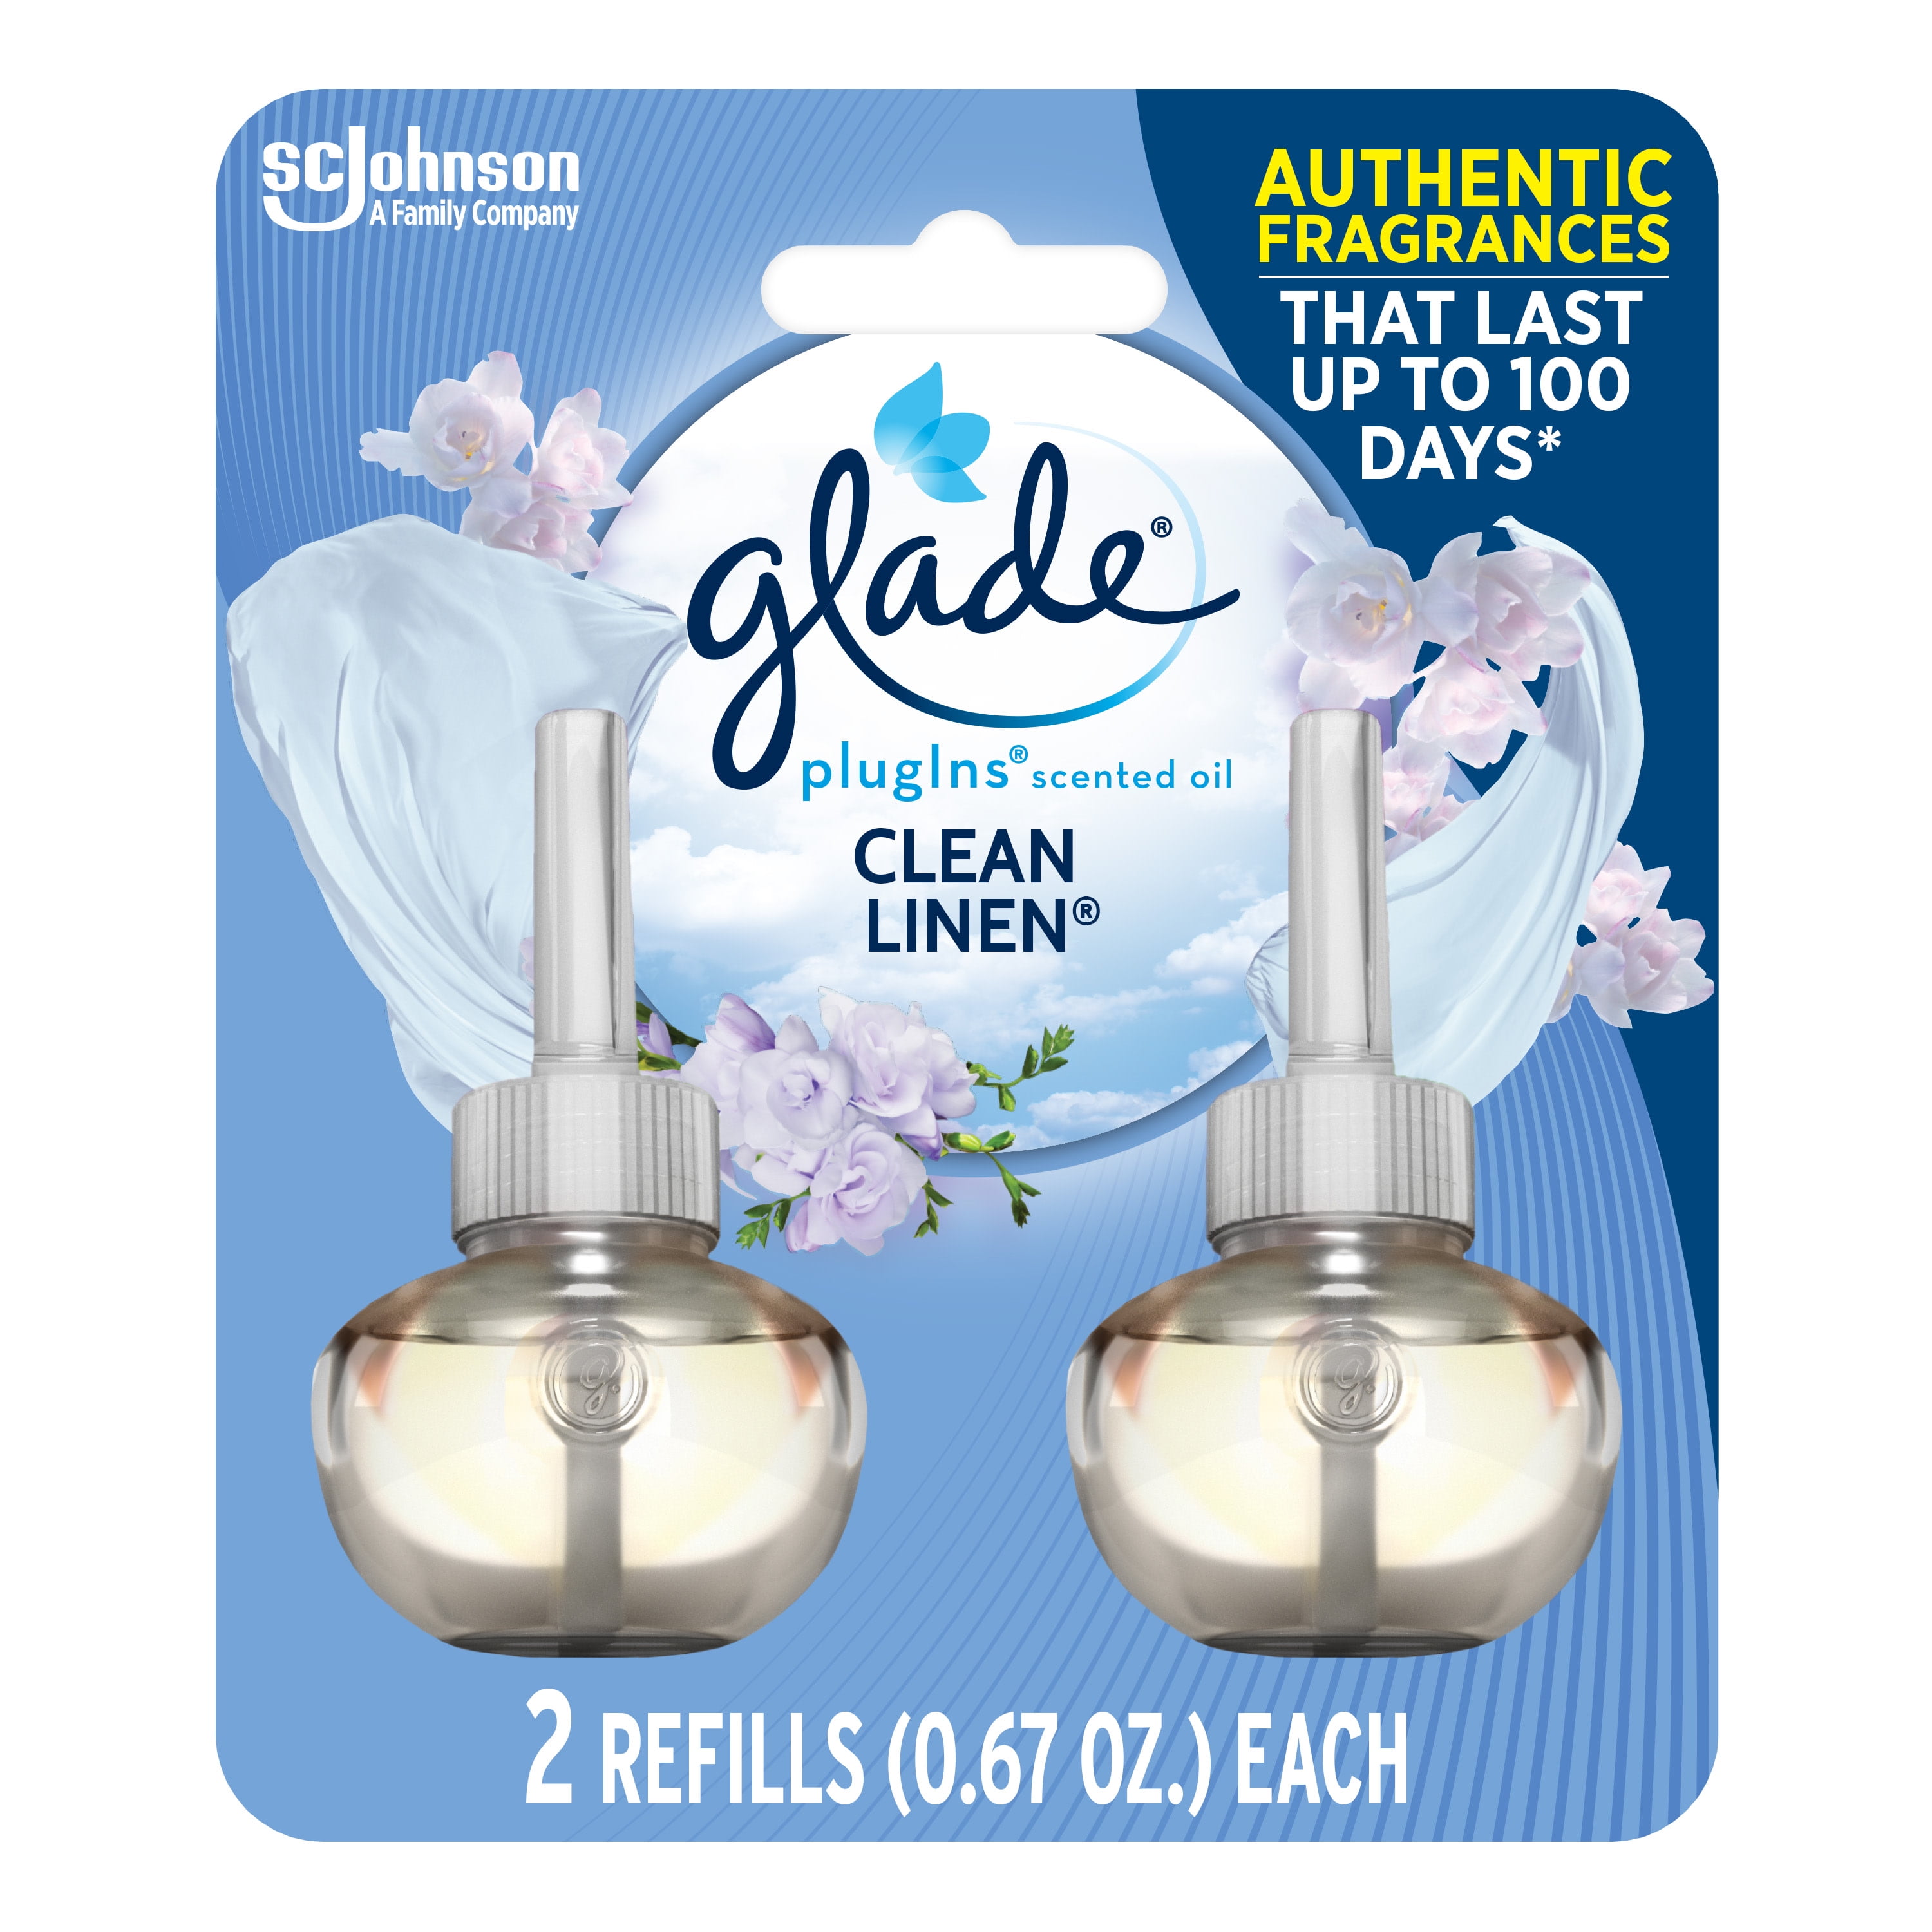 Glade PlugIns Refill 2 CT, Clean Linen, 1.34 FL. OZ. Total, Scented Oil Air Freshener Infused with Essential Oils